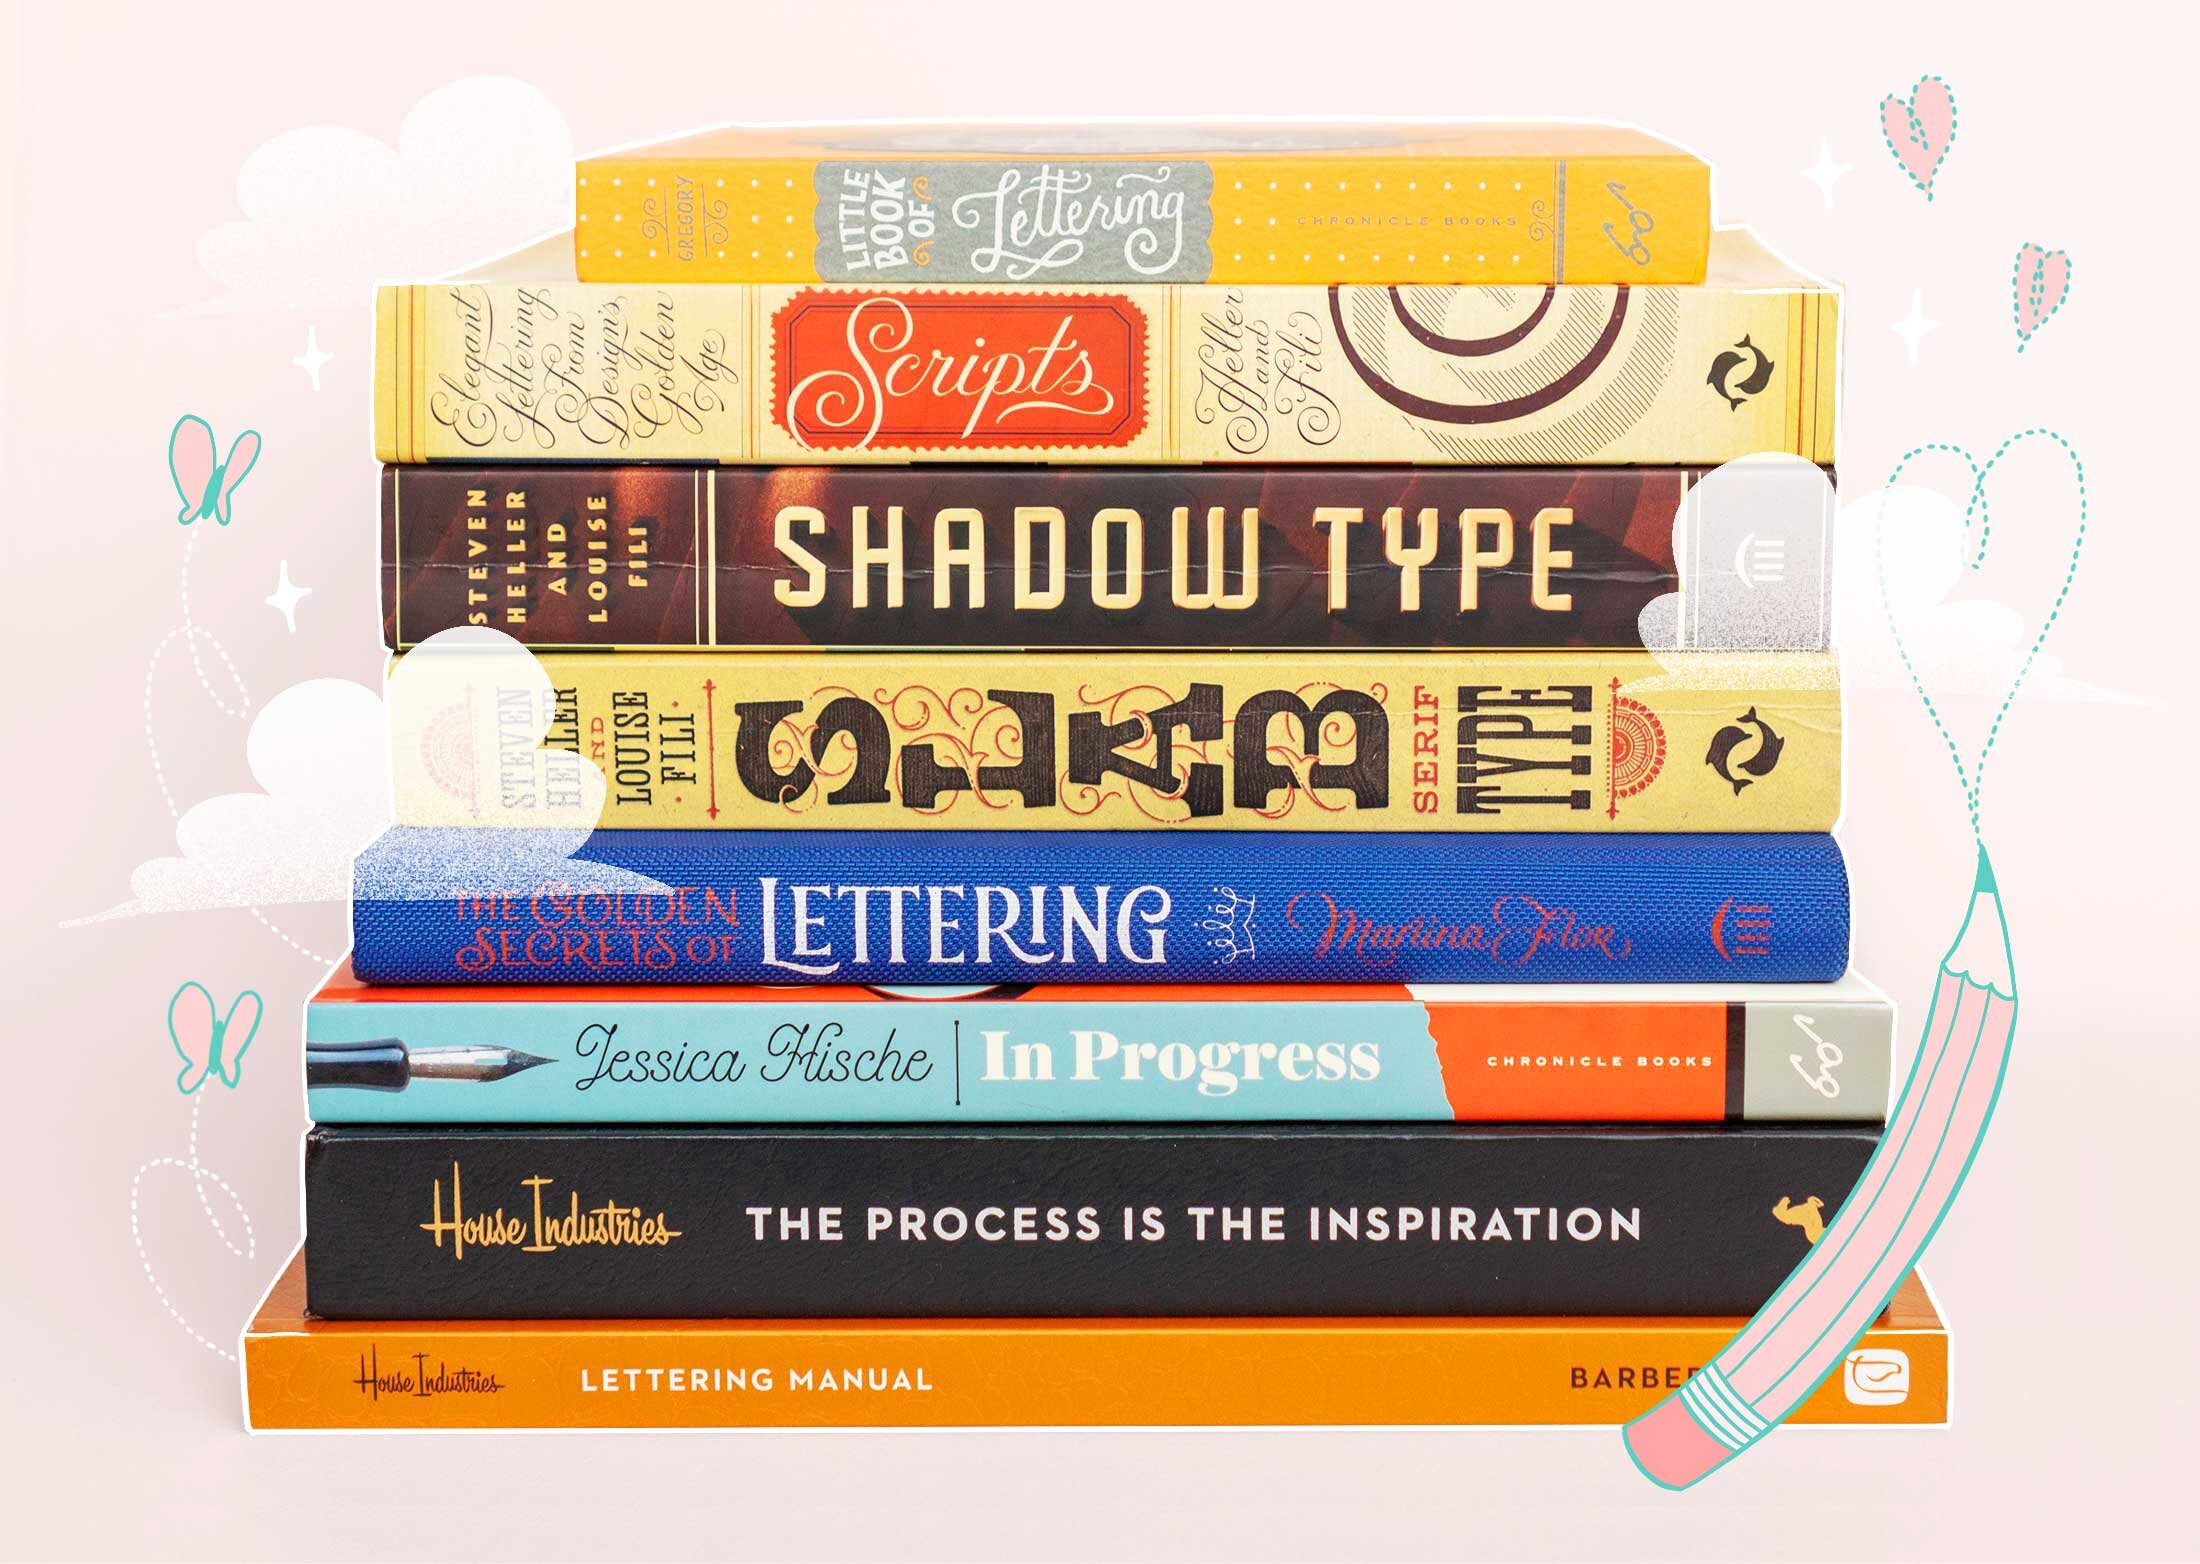 Best Books for Hand Lettering  My Recommendations Pt. 2 